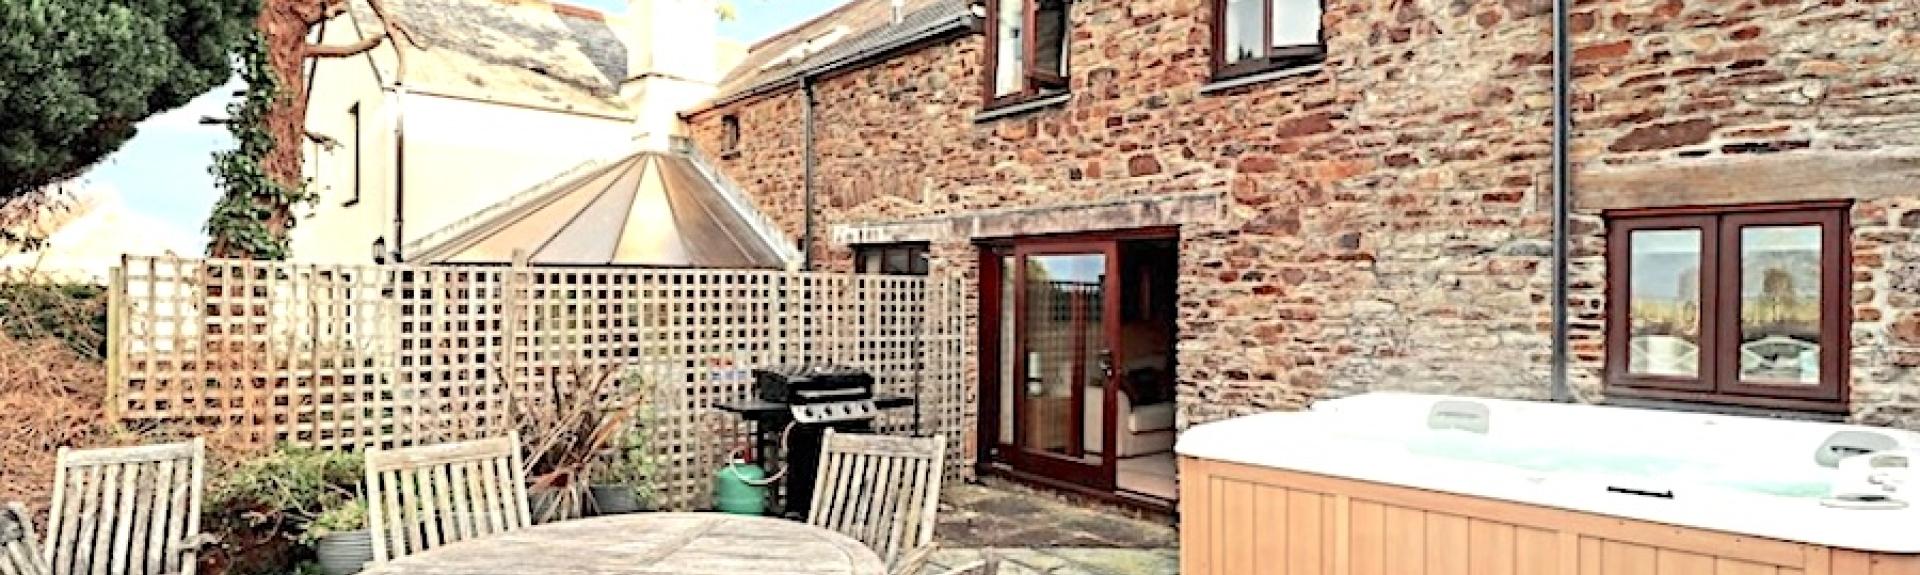 A holiday cottage courtyard with a hot tub, outdoor dining table and chairs